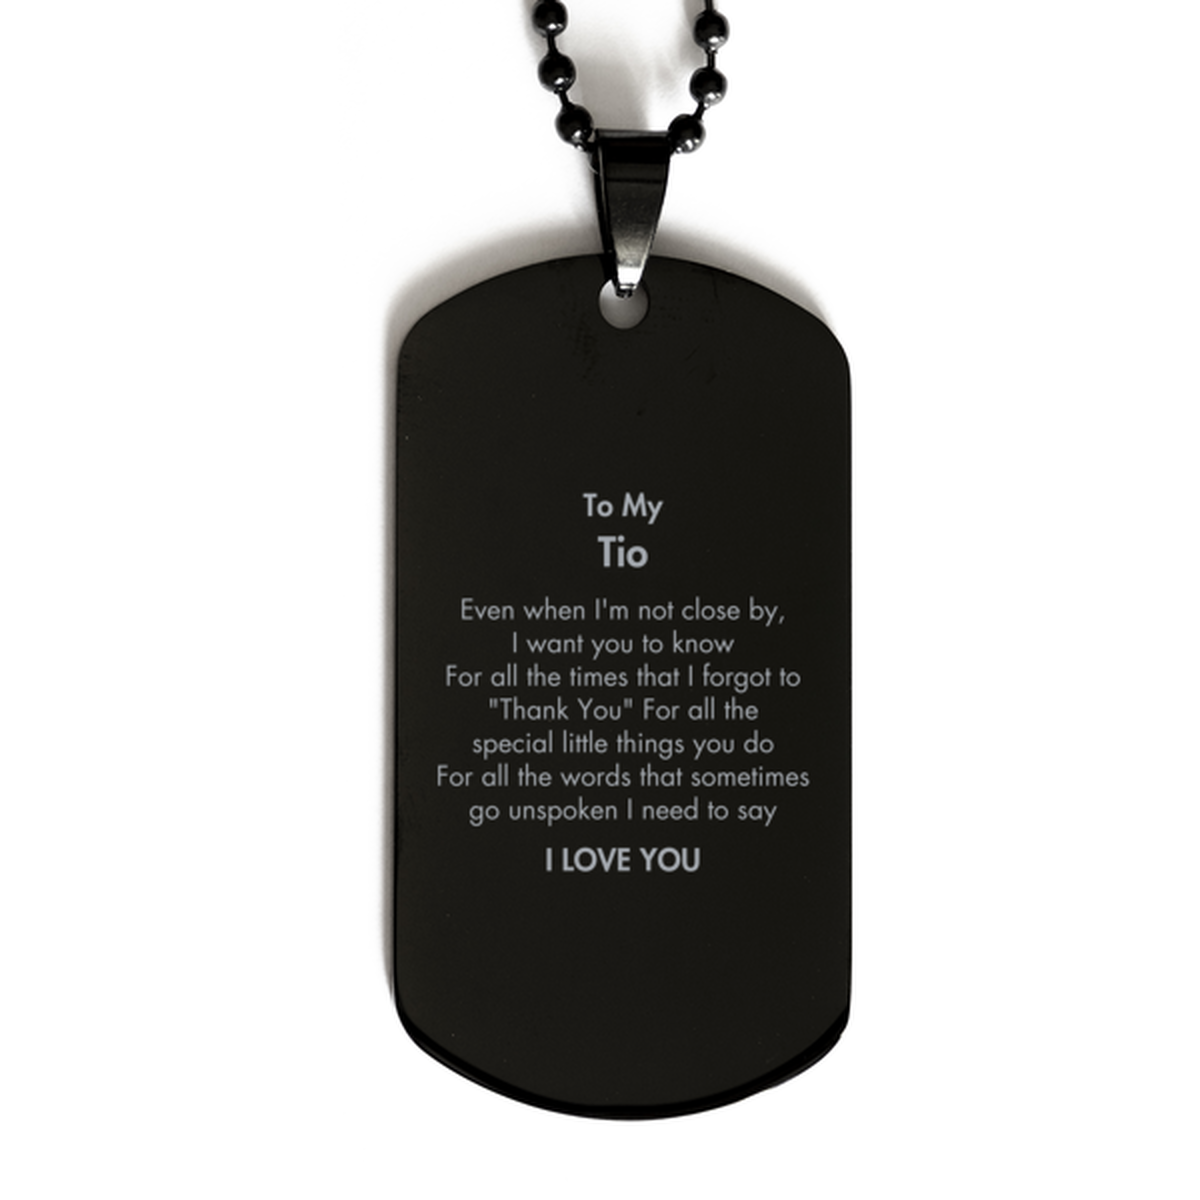 Thank You Gifts for Tio, Keepsake Black Dog Tag Gifts for Tio Birthday Mother's day Father's Day Tio For all the words That sometimes go unspoken I need to say I LOVE YOU